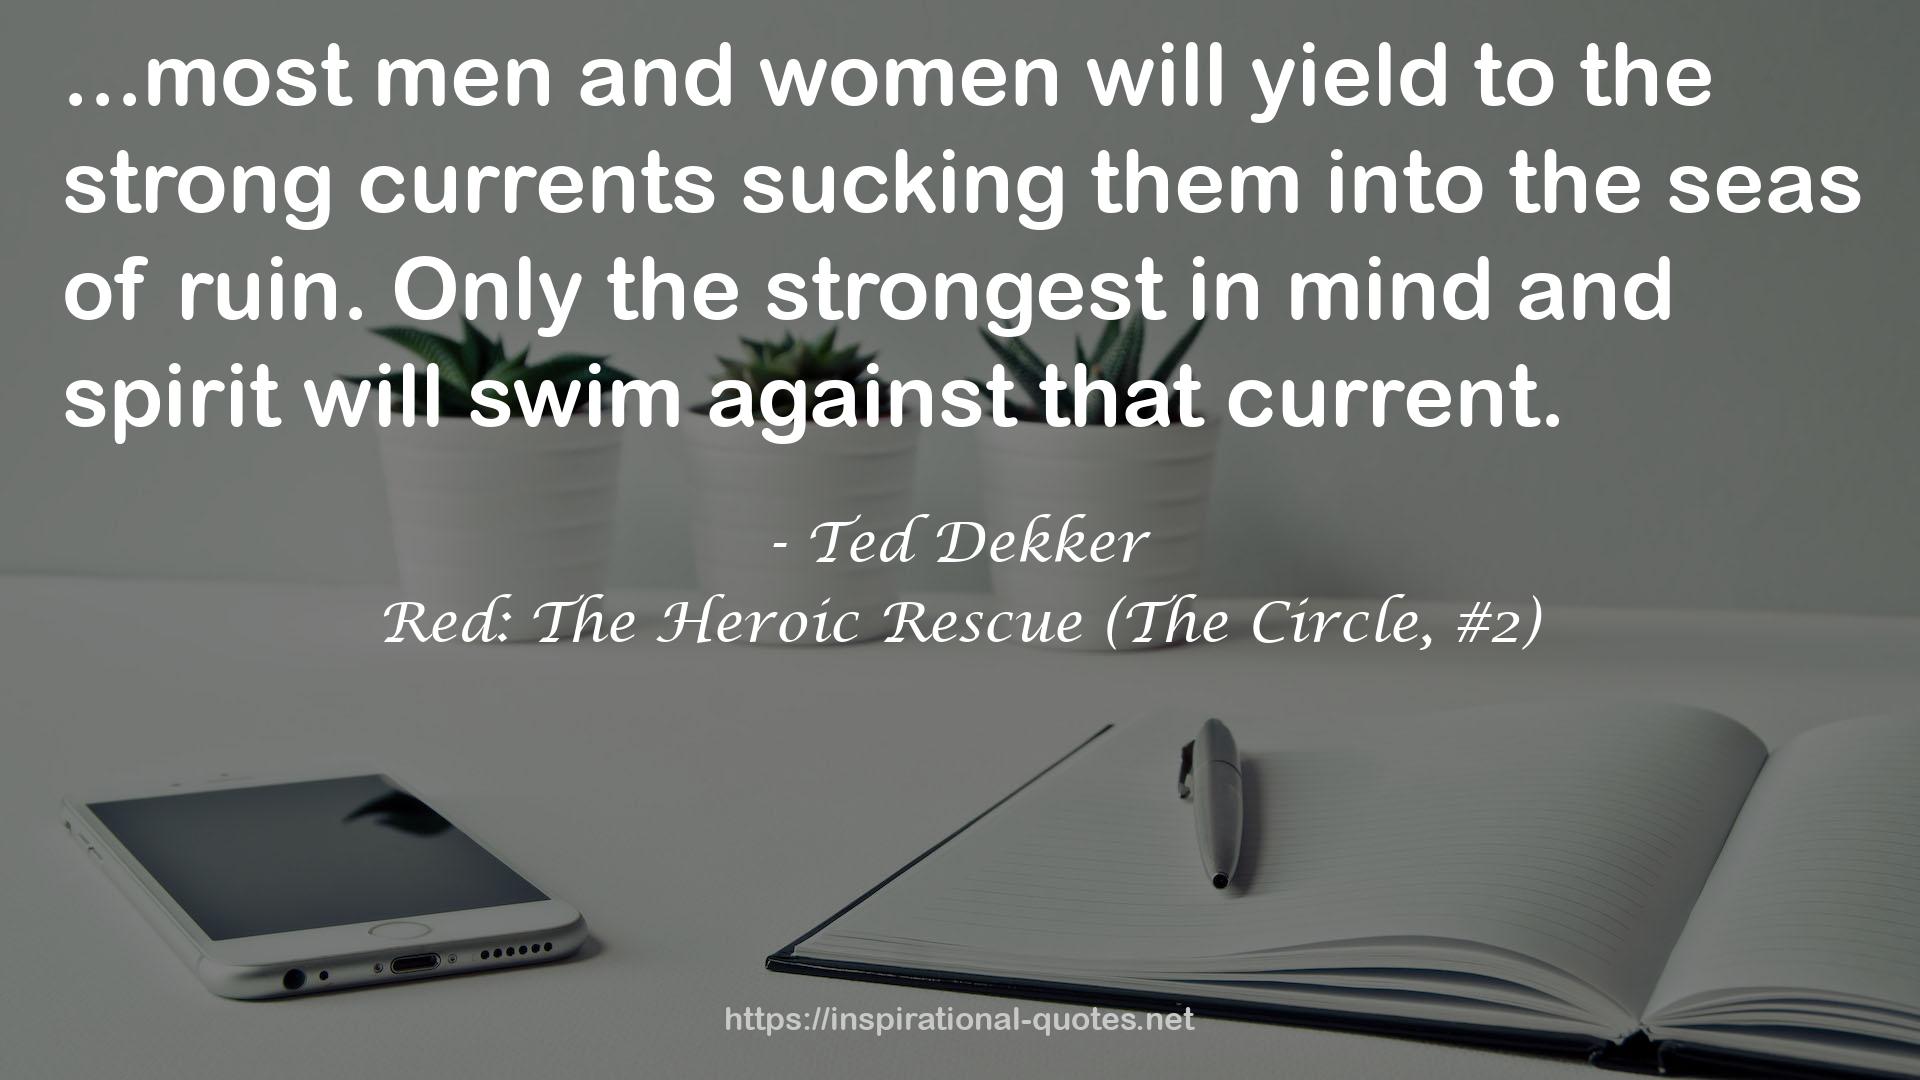 Red: The Heroic Rescue (The Circle, #2) QUOTES